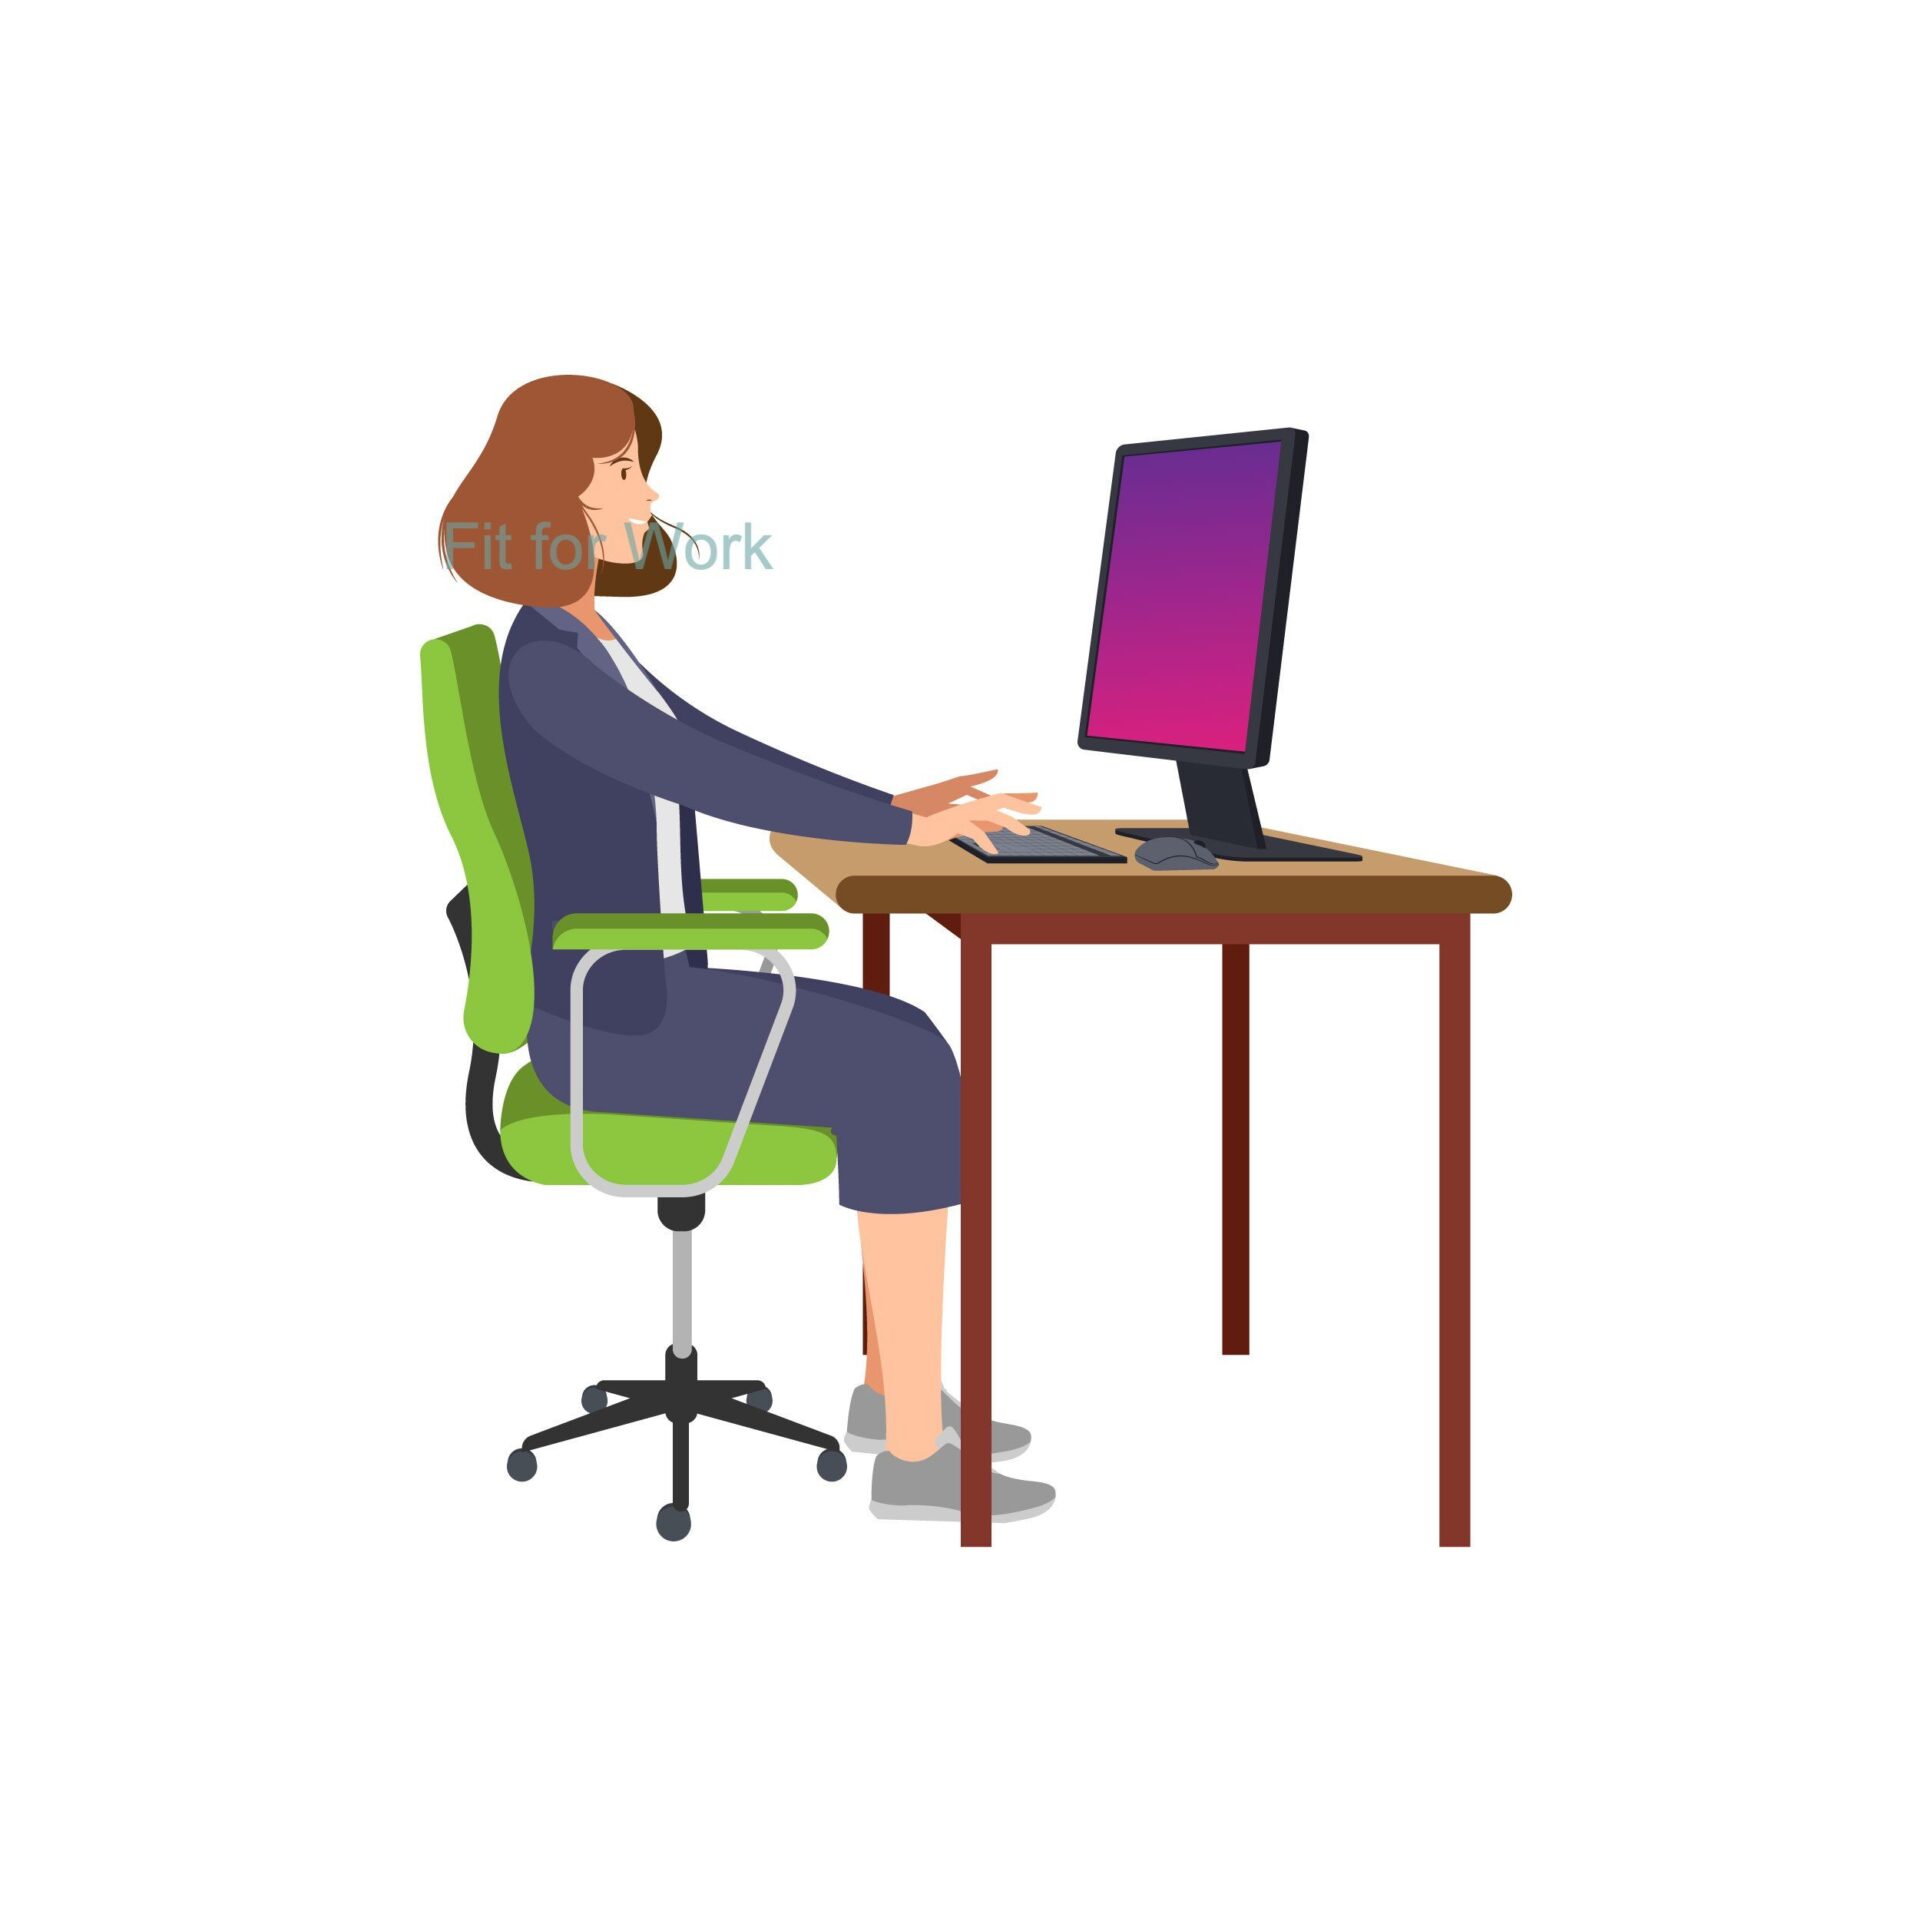 TYPING AND ERGONOMICS – WHAT IS IMPORTANT?